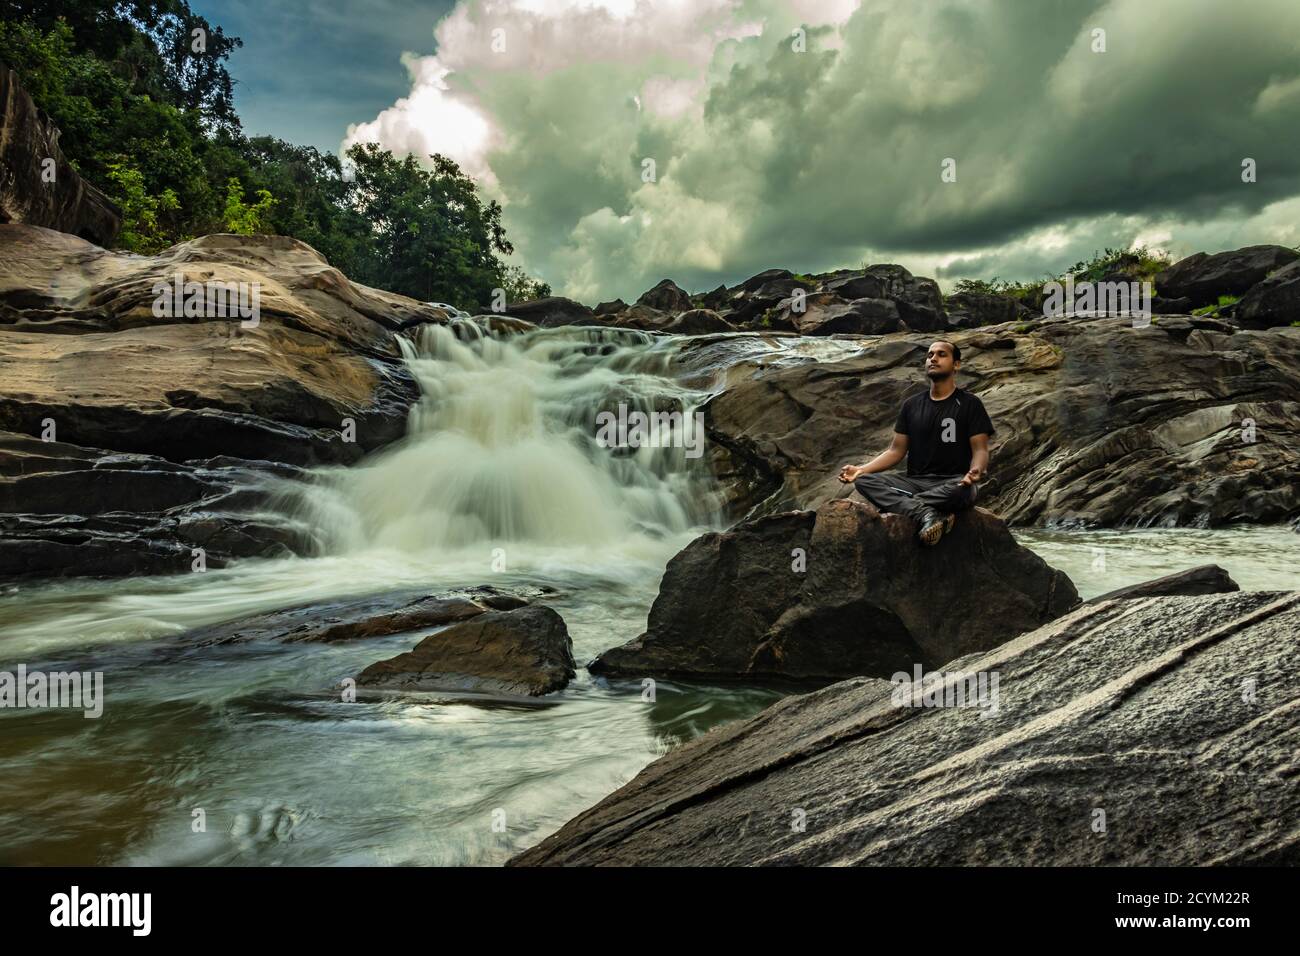 man meditating at rock with the beautiful waterfall stream at evening image is taken at remote western ghat forests karnataka india. it is showing the Stock Photo